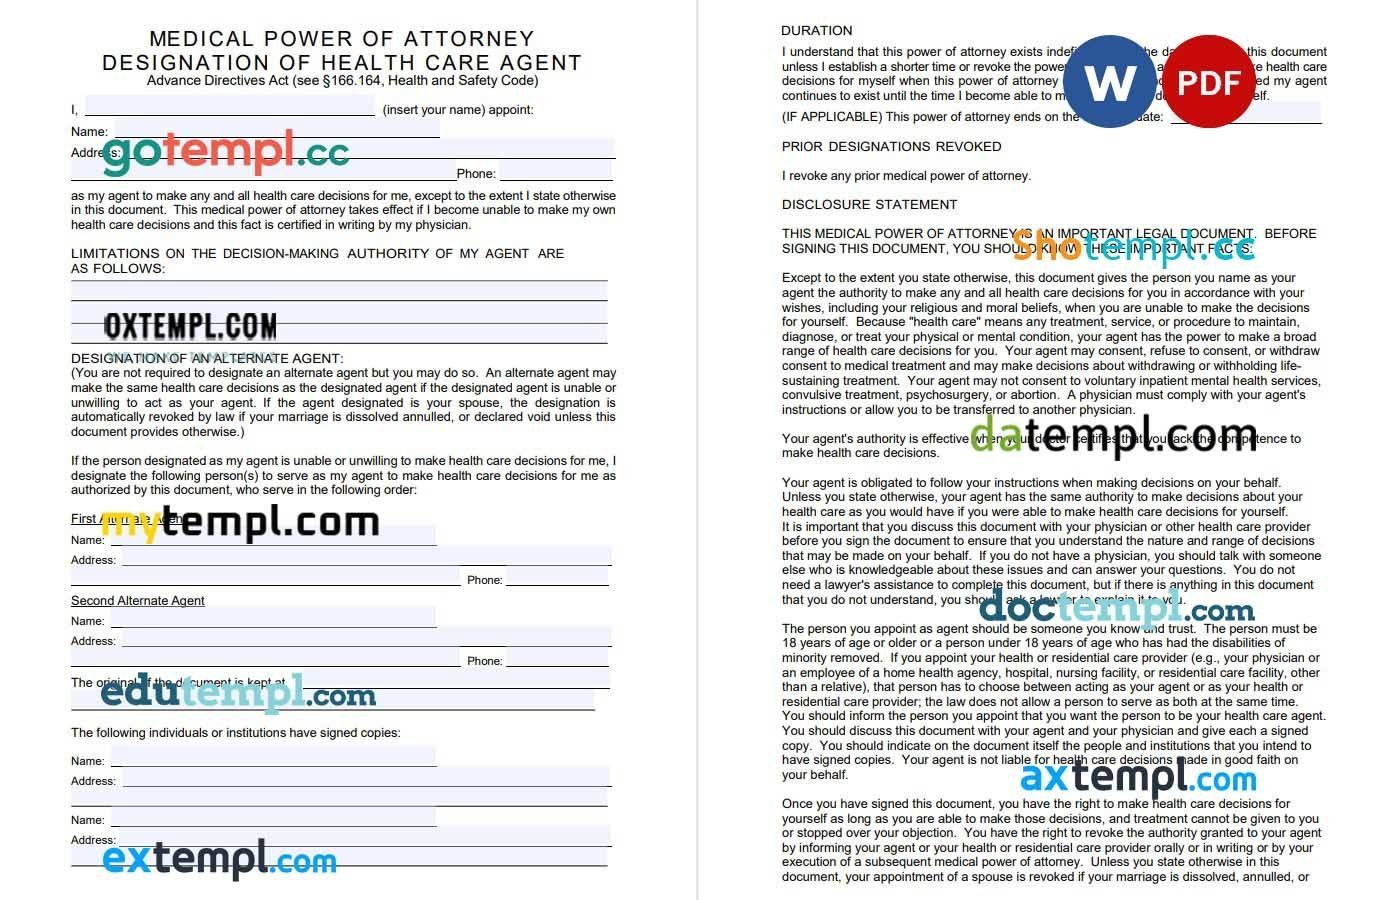 Texas Durable Power of Attorney Form for Health Care 1 example, fully editable